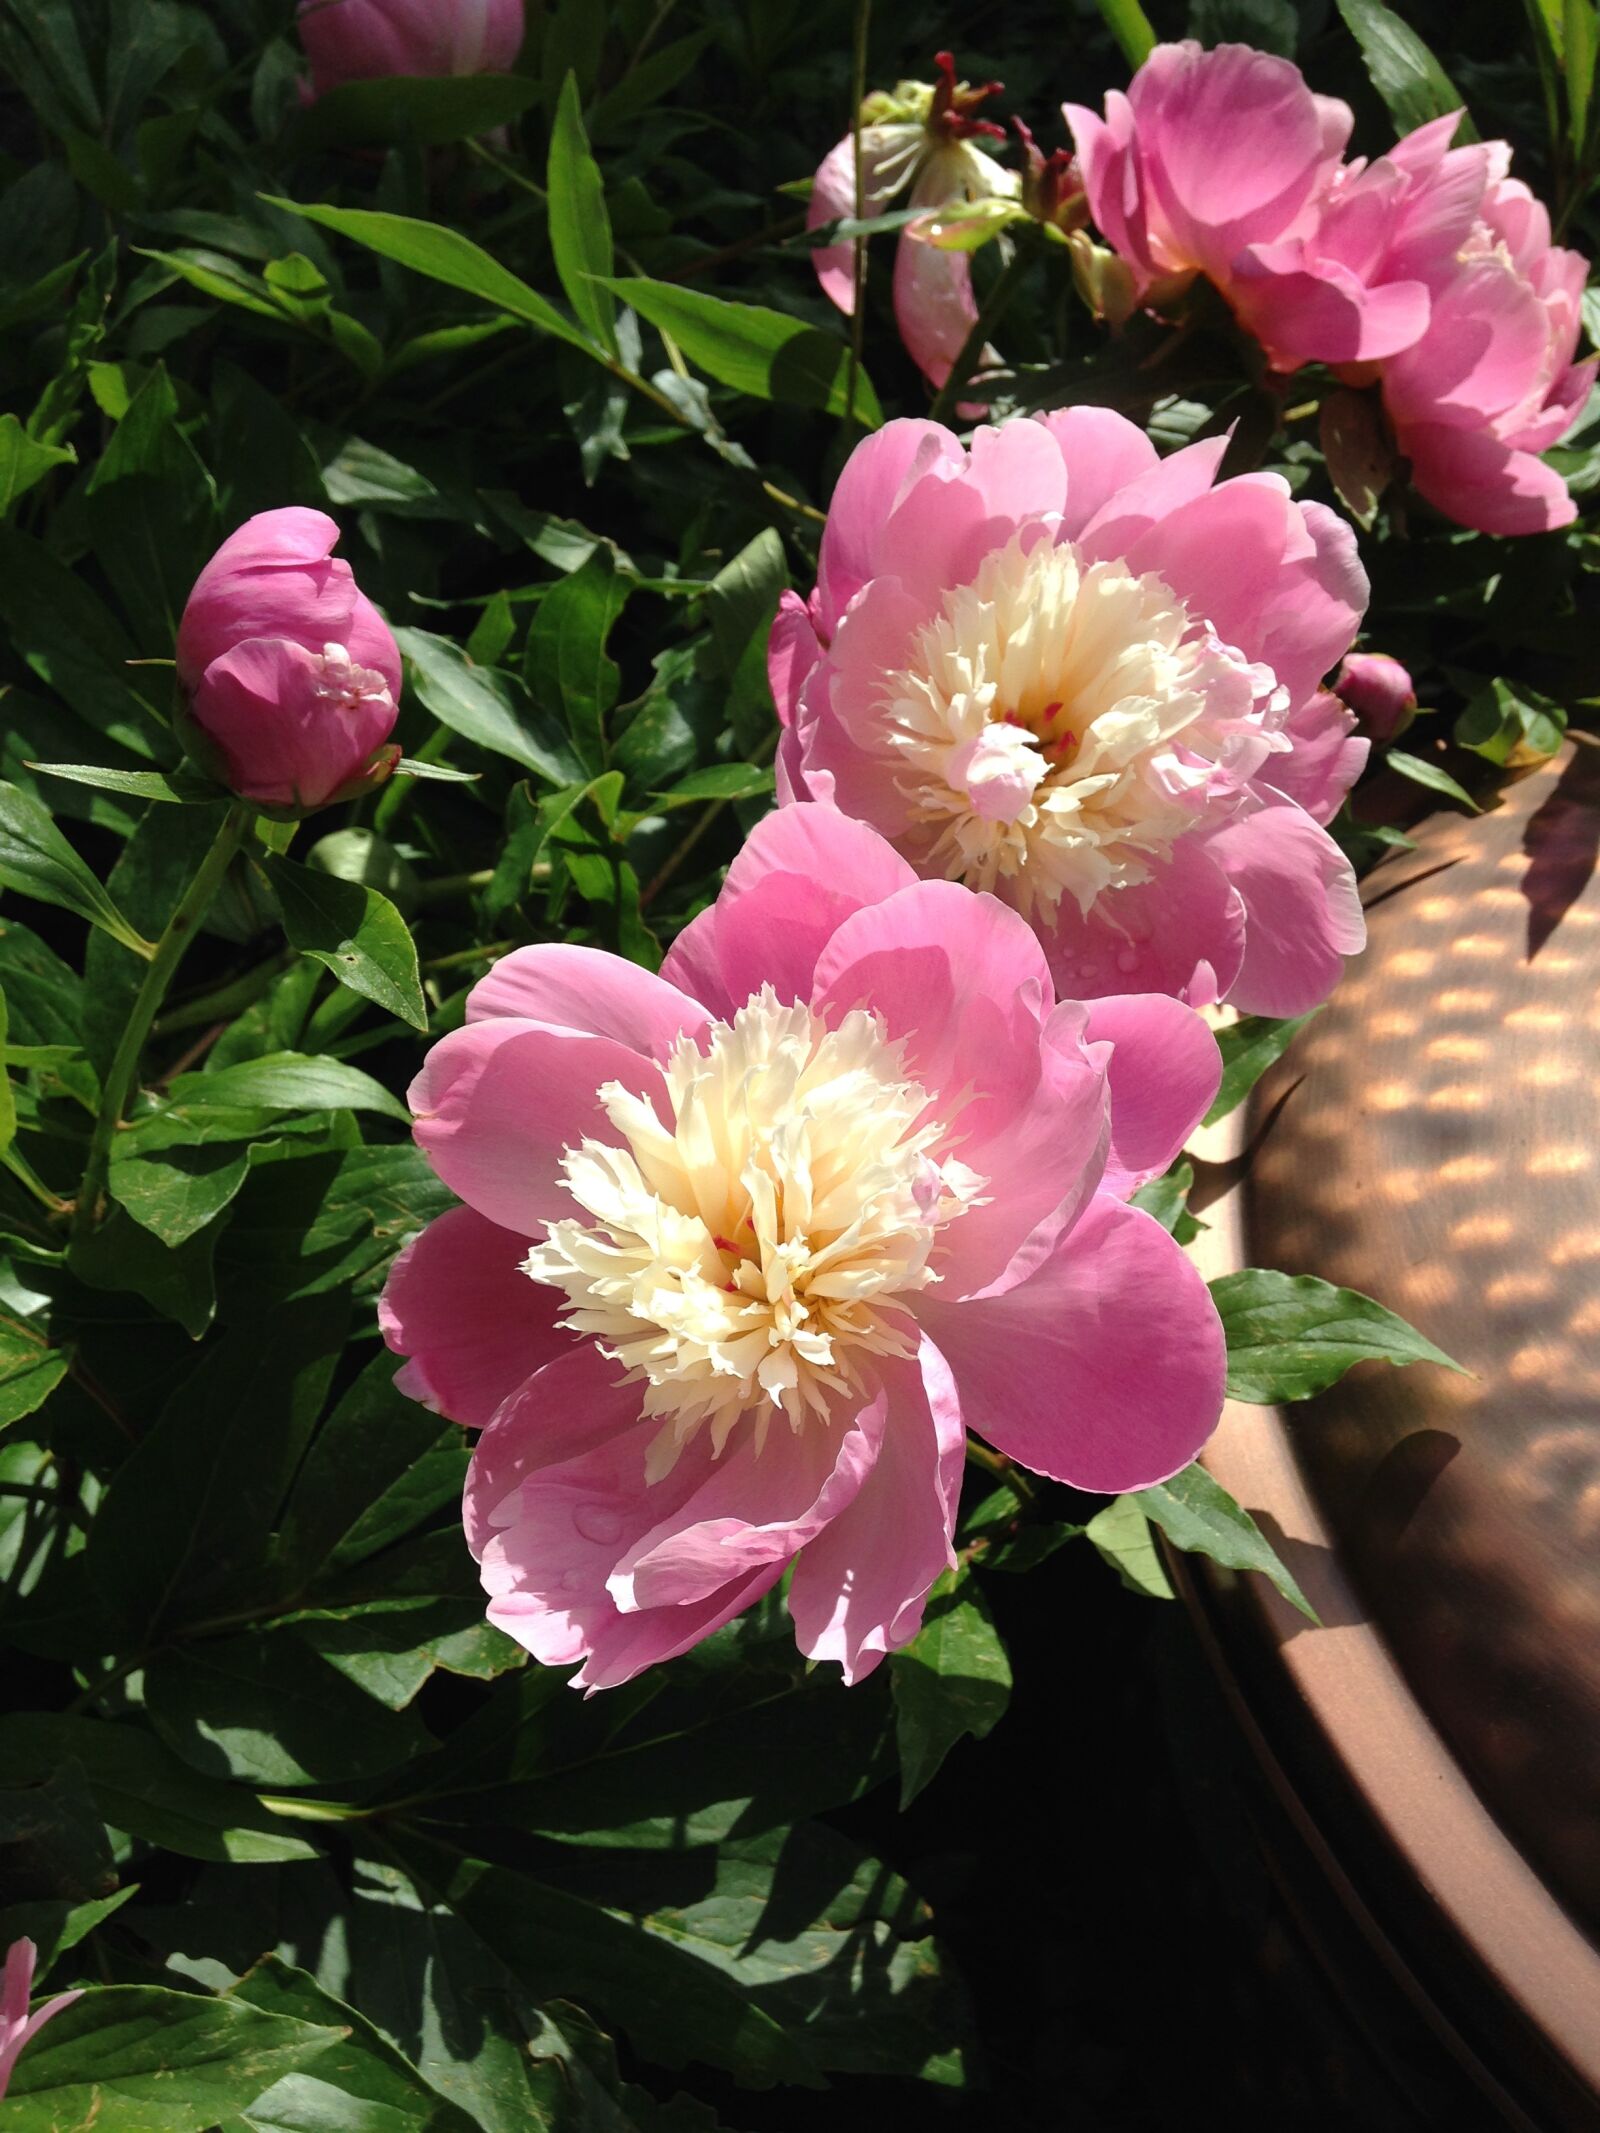 Apple iPhone 5c sample photo. Peonies, blossoms, garden photography